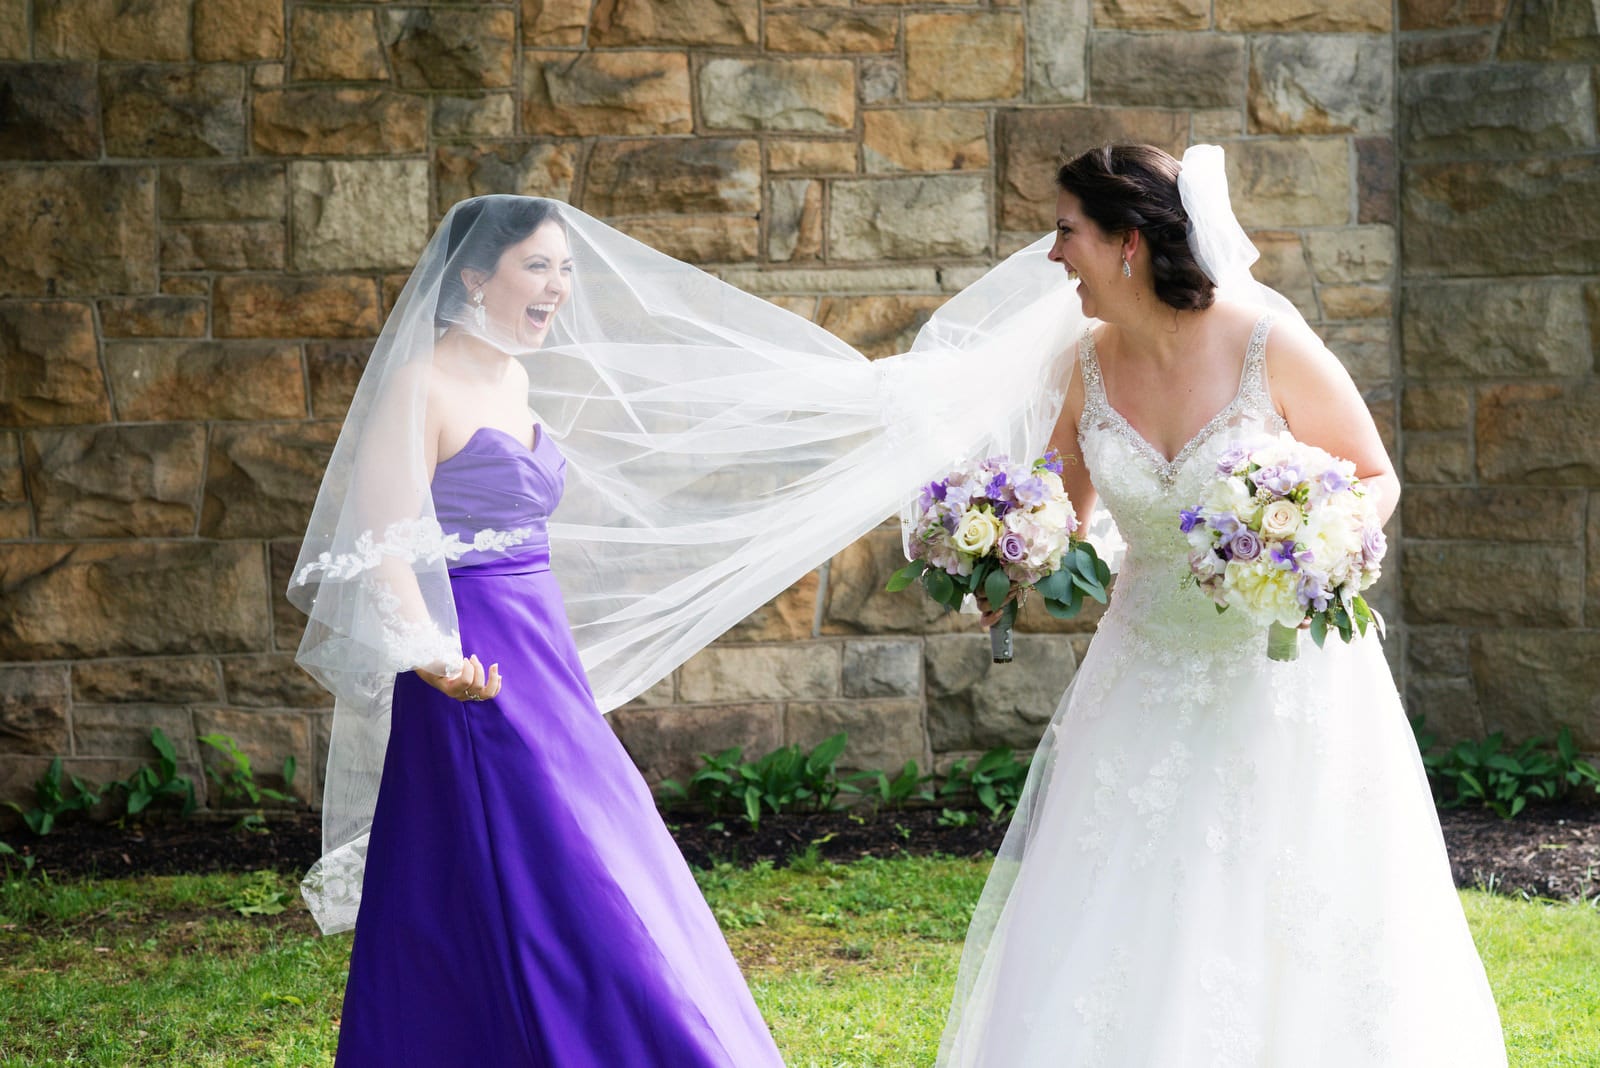 A bride laughs with her sister who wears a purple dress while standing under the veil before the bride's wedding at the Grand Concourse.